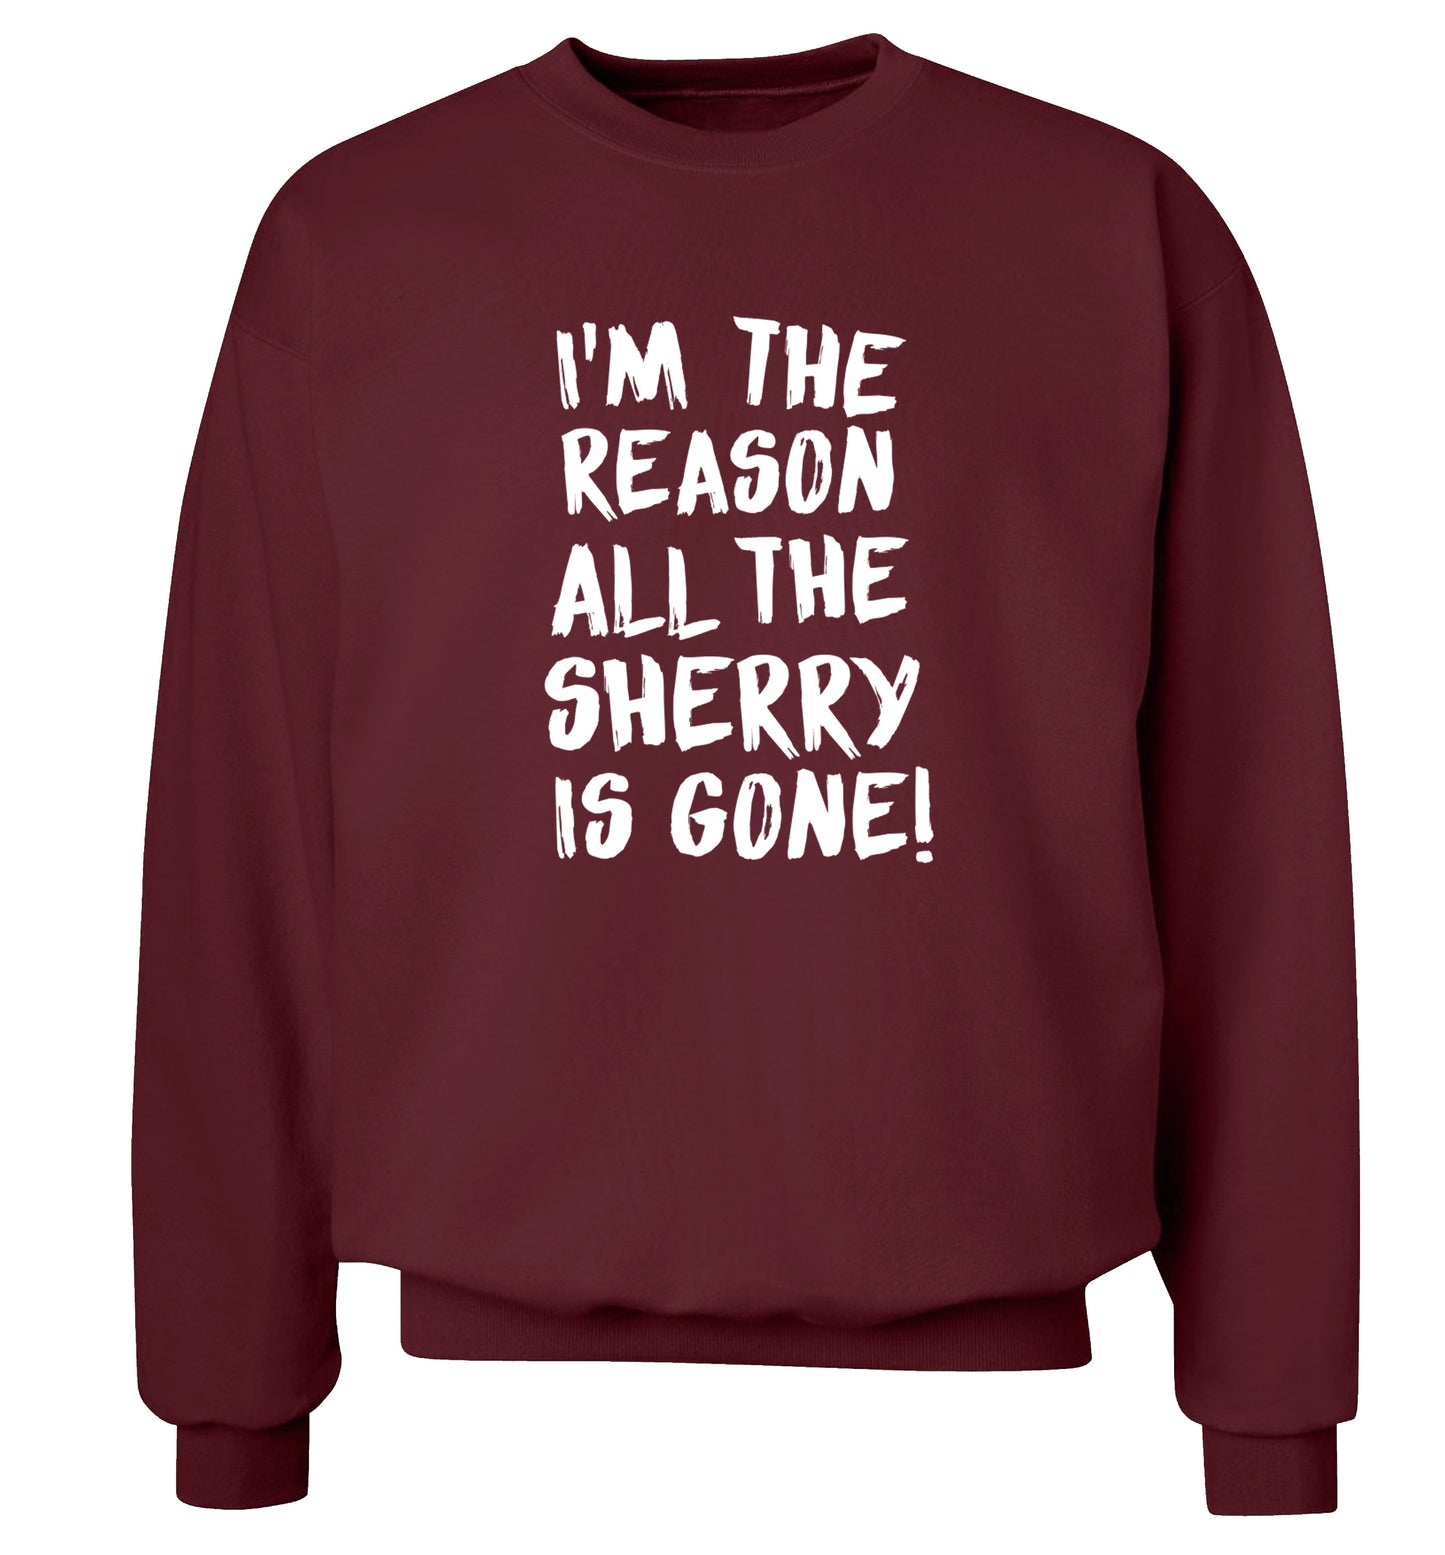 I'm the reason all the sherry is gone Adult's unisex maroon Sweater 2XL